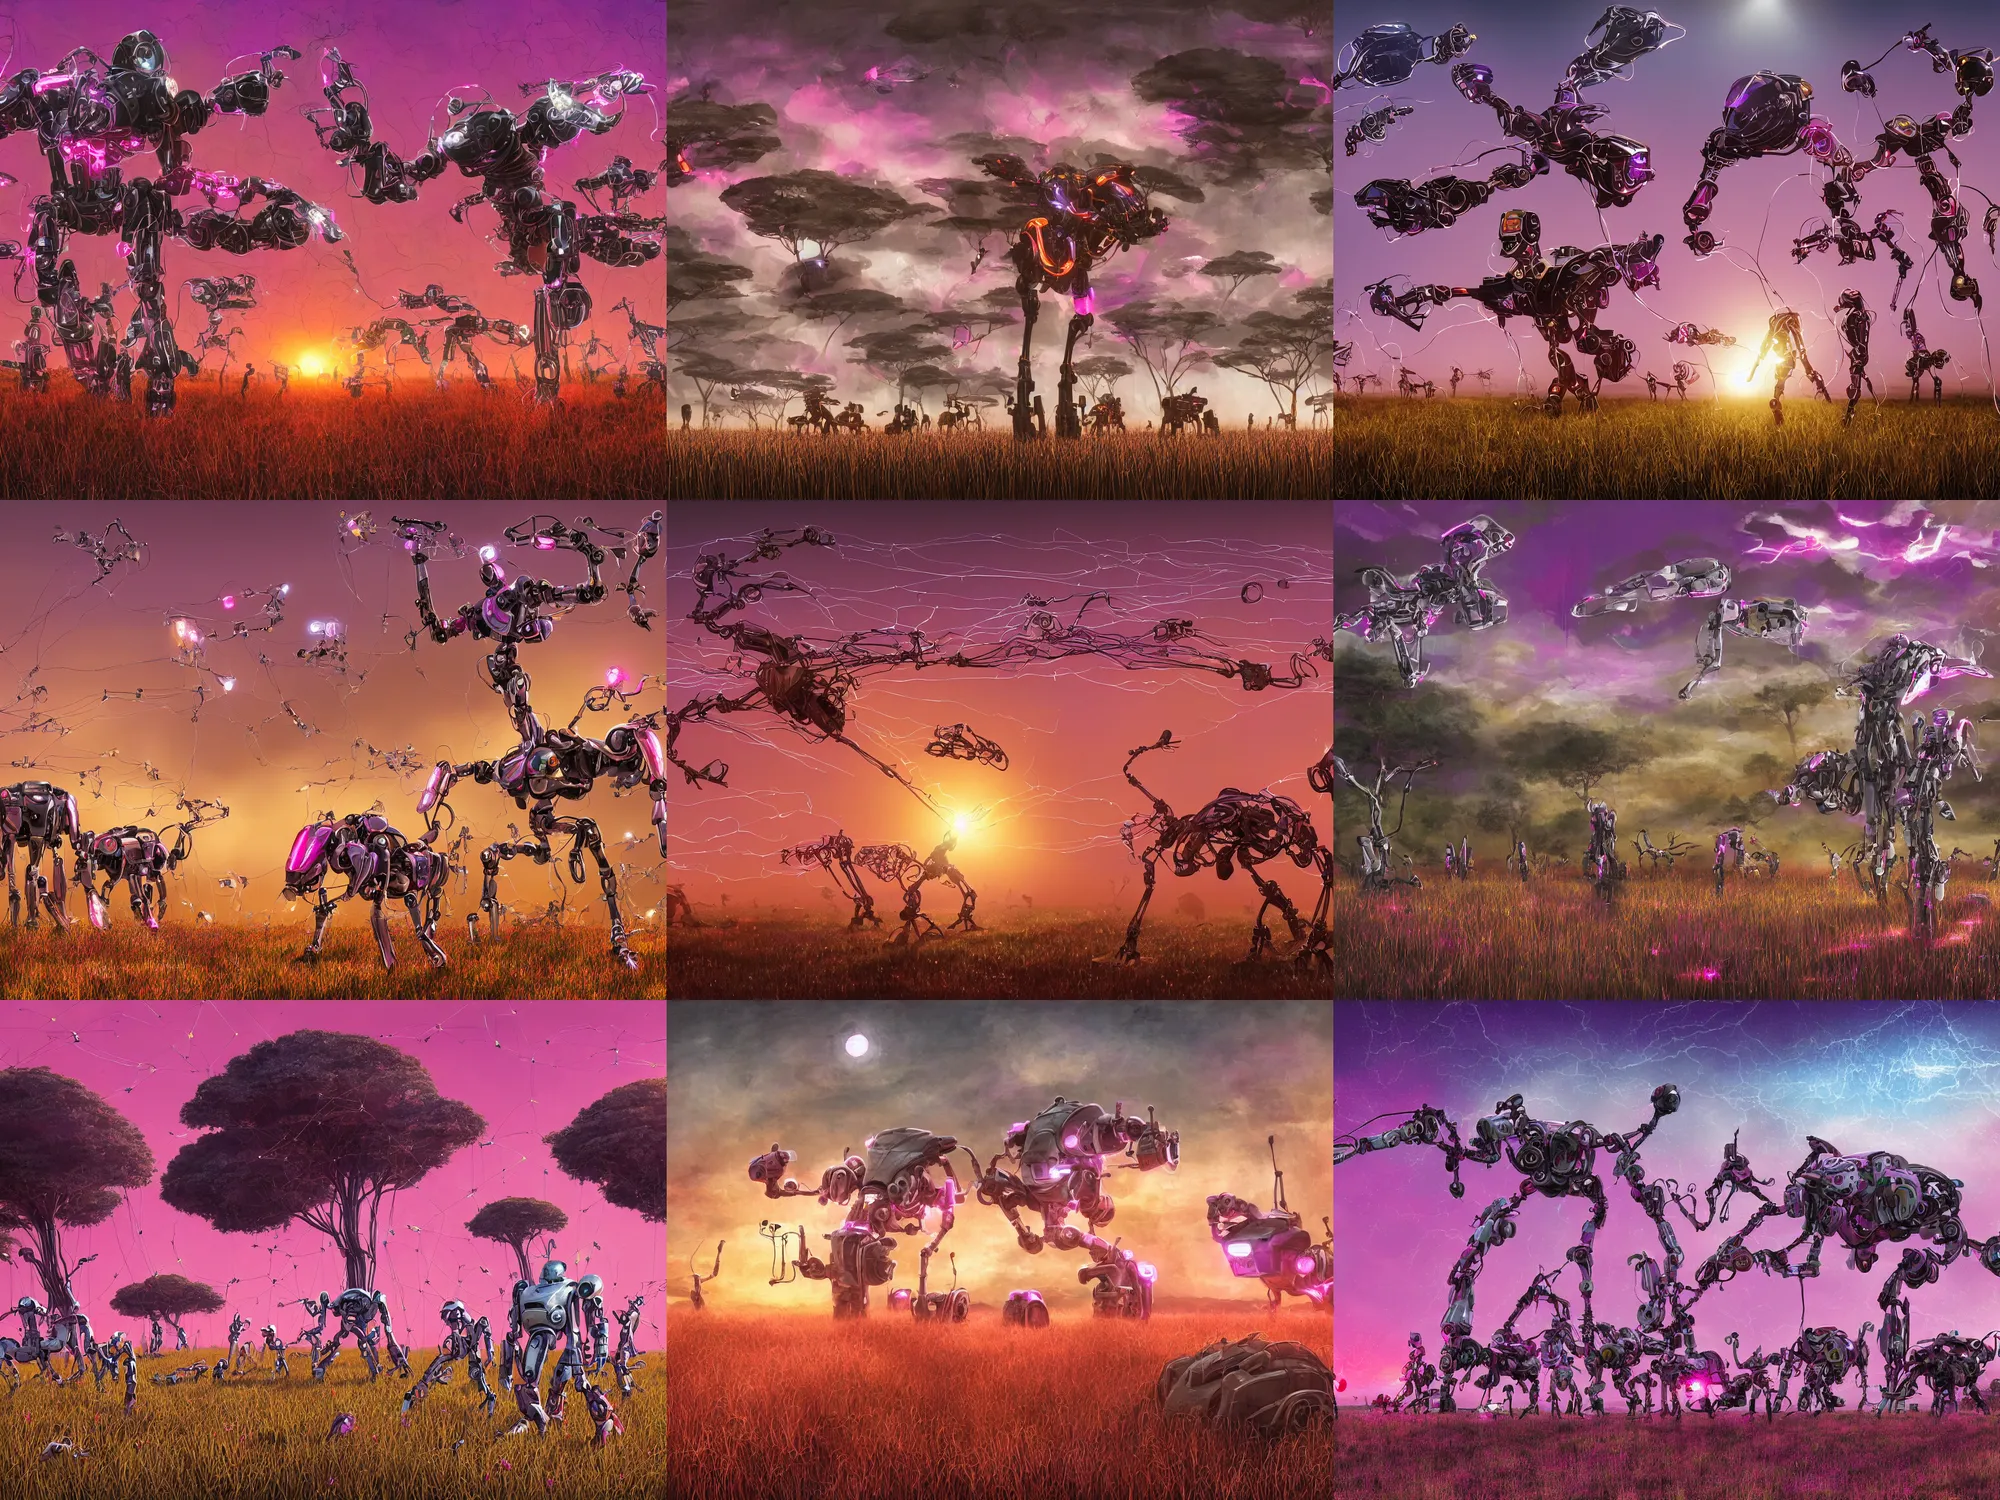 Prompt: pink, orange, purple, shields, flashes, white metal and black plastic robot wildlife, wires and lights, herds fighting, african plains, long grass, futuristic robot organisms, digital matt painting, fantasy art, another world, acacia trees, dramatic lighting, cinematic, anamorphic, golden hour